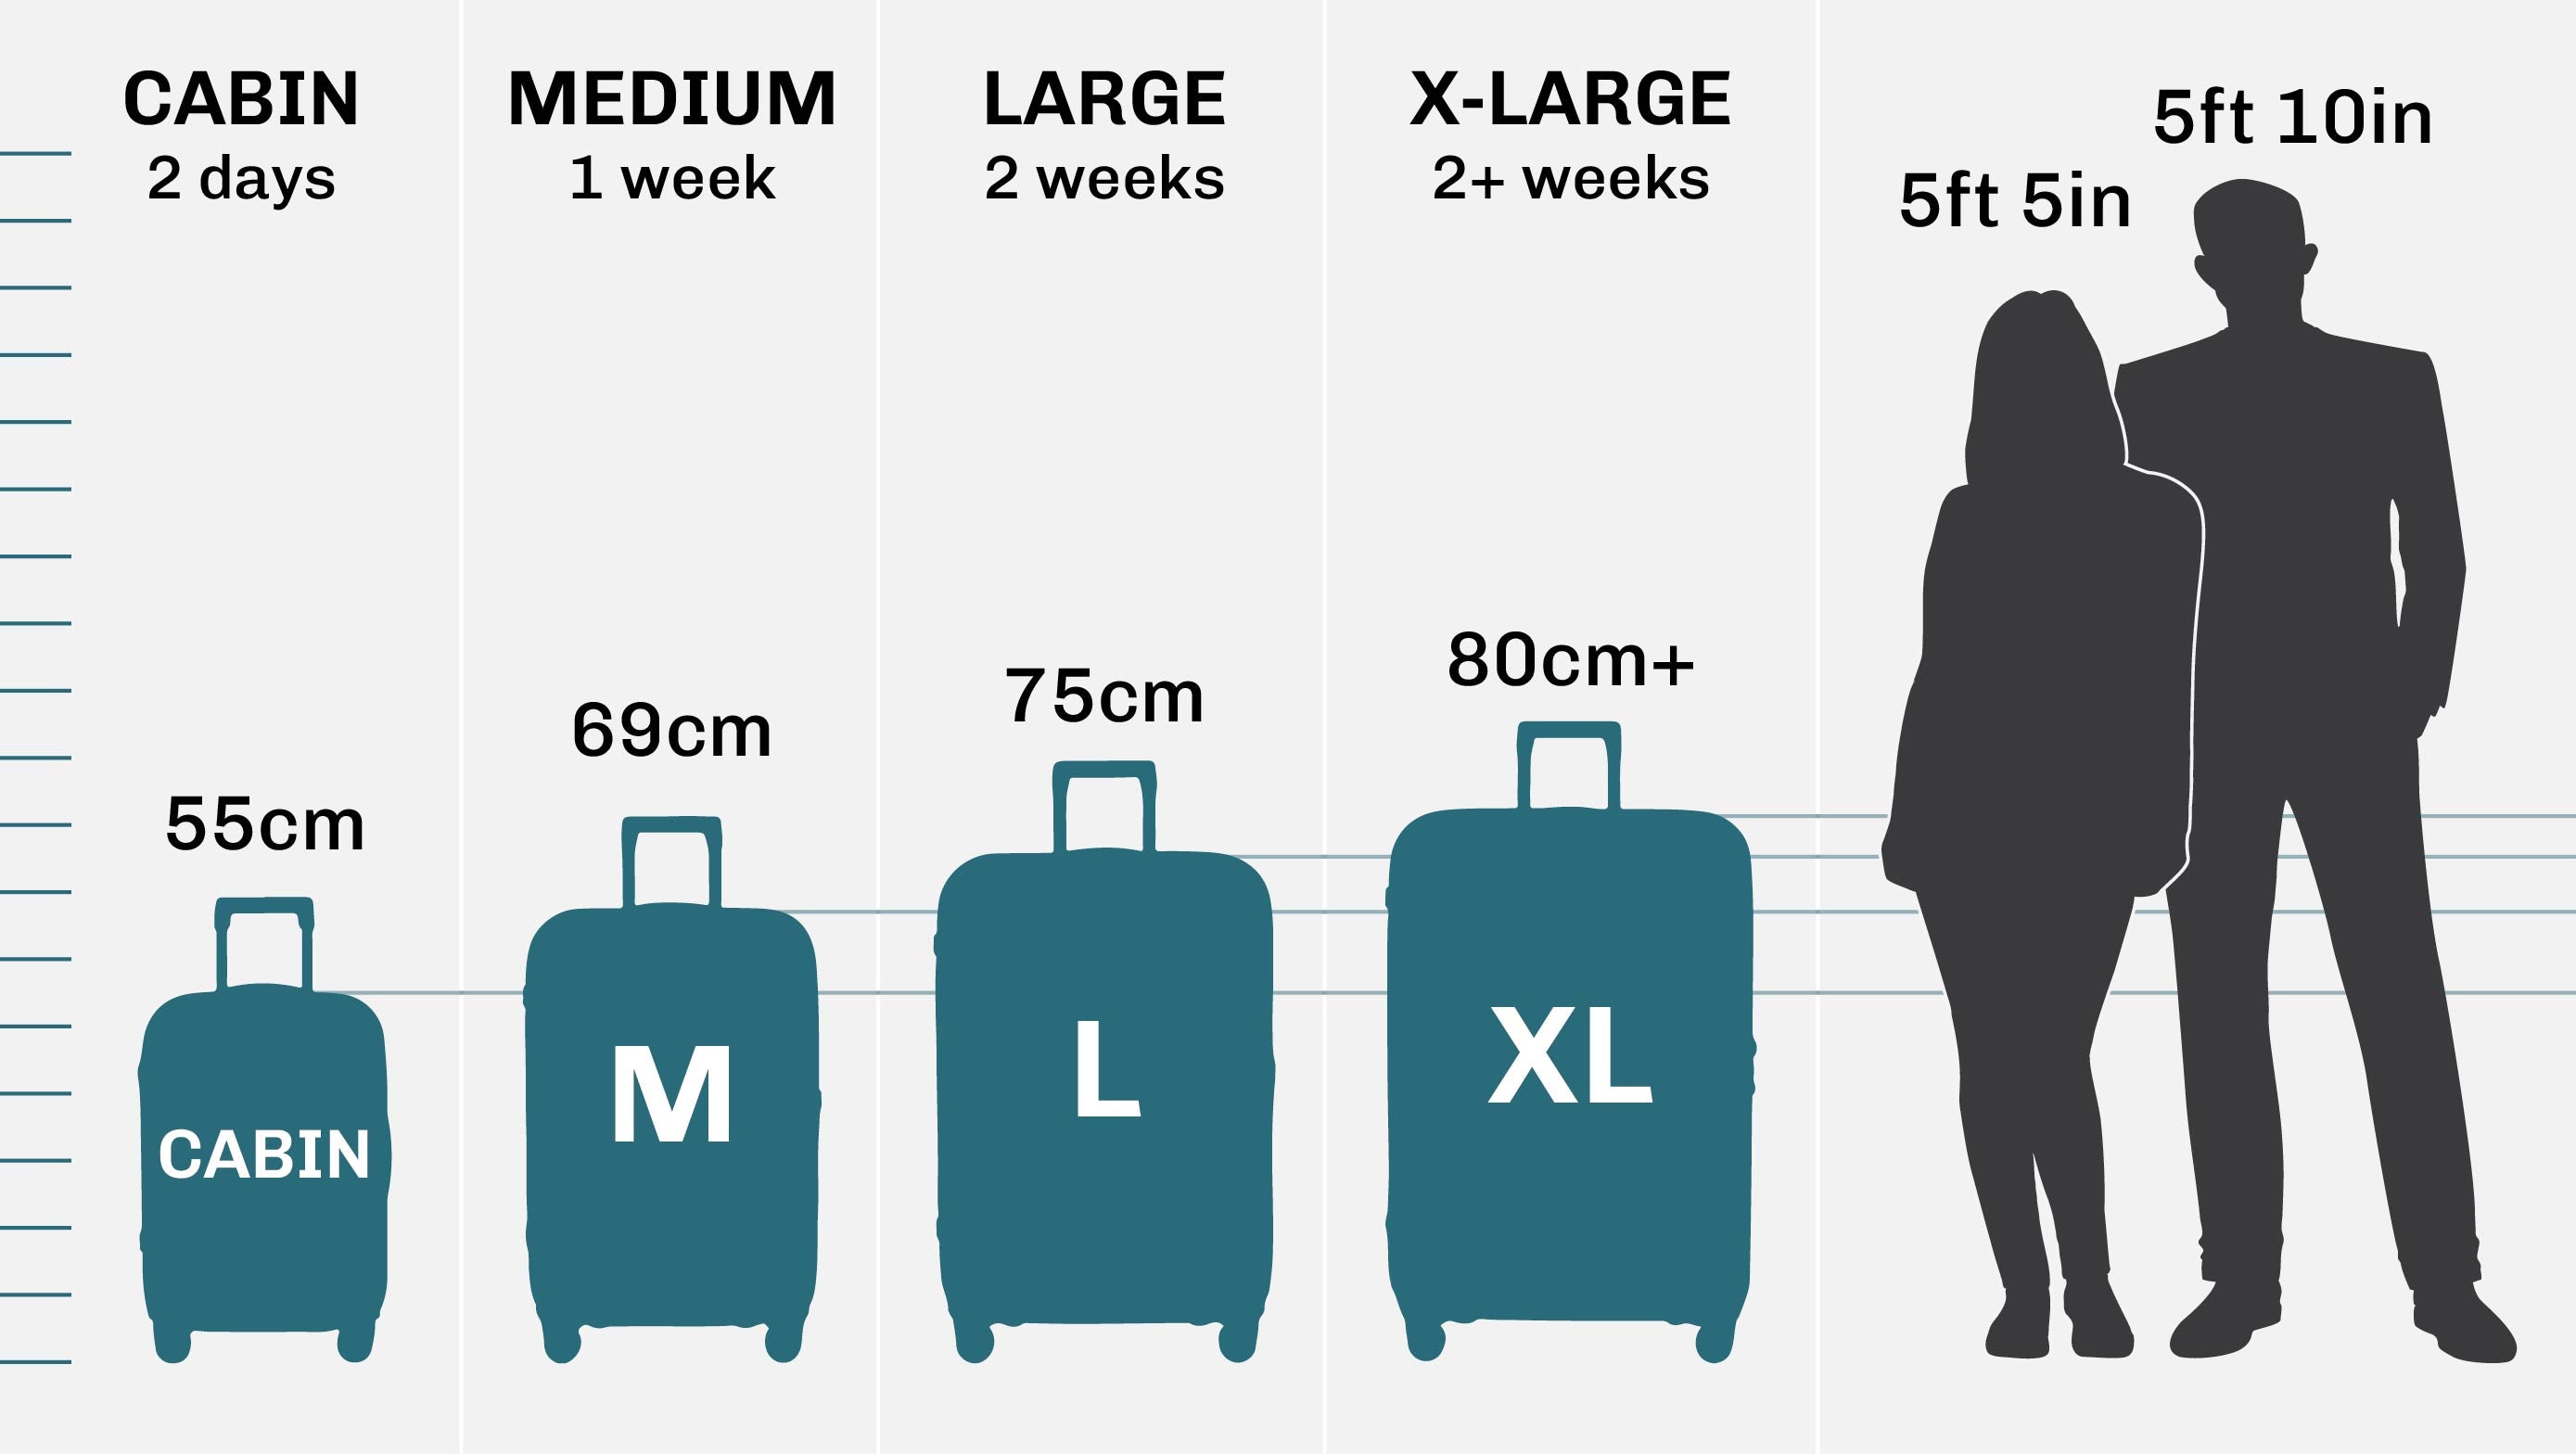 Suitcase Size Guide